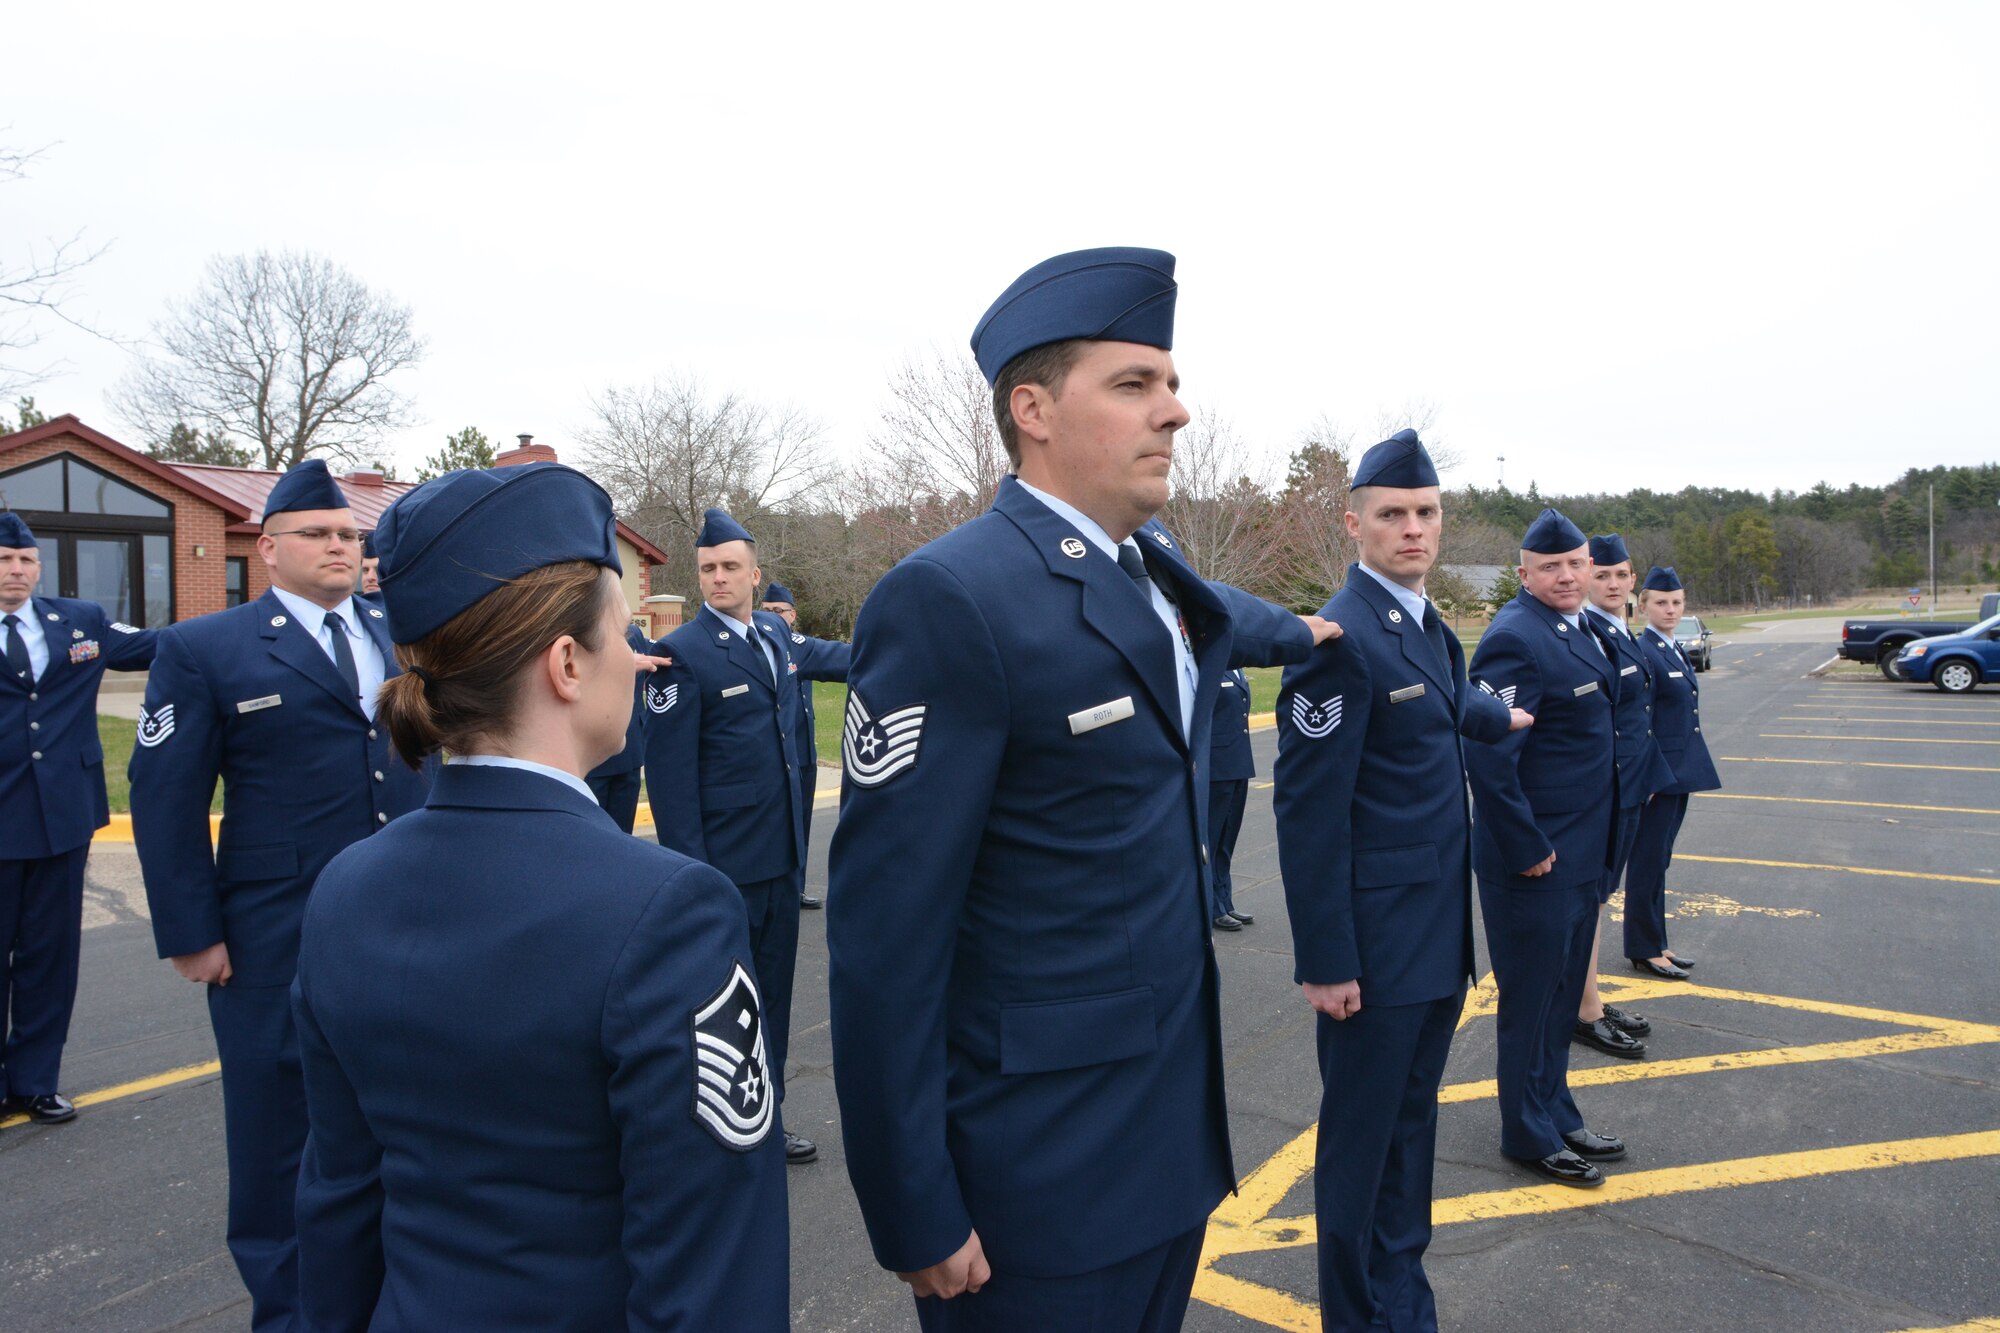 Airmen who attended the State Enlisted Development Program participate in an open ranks inspection at Volk Field Air National Guard Base, Wis., April 23, 2014. This was the first time all Wisconsin ANG Airmen were invited to complete the course as a single unit. (Air National Guard photo by Senior Airman Andrea F. Liechti)